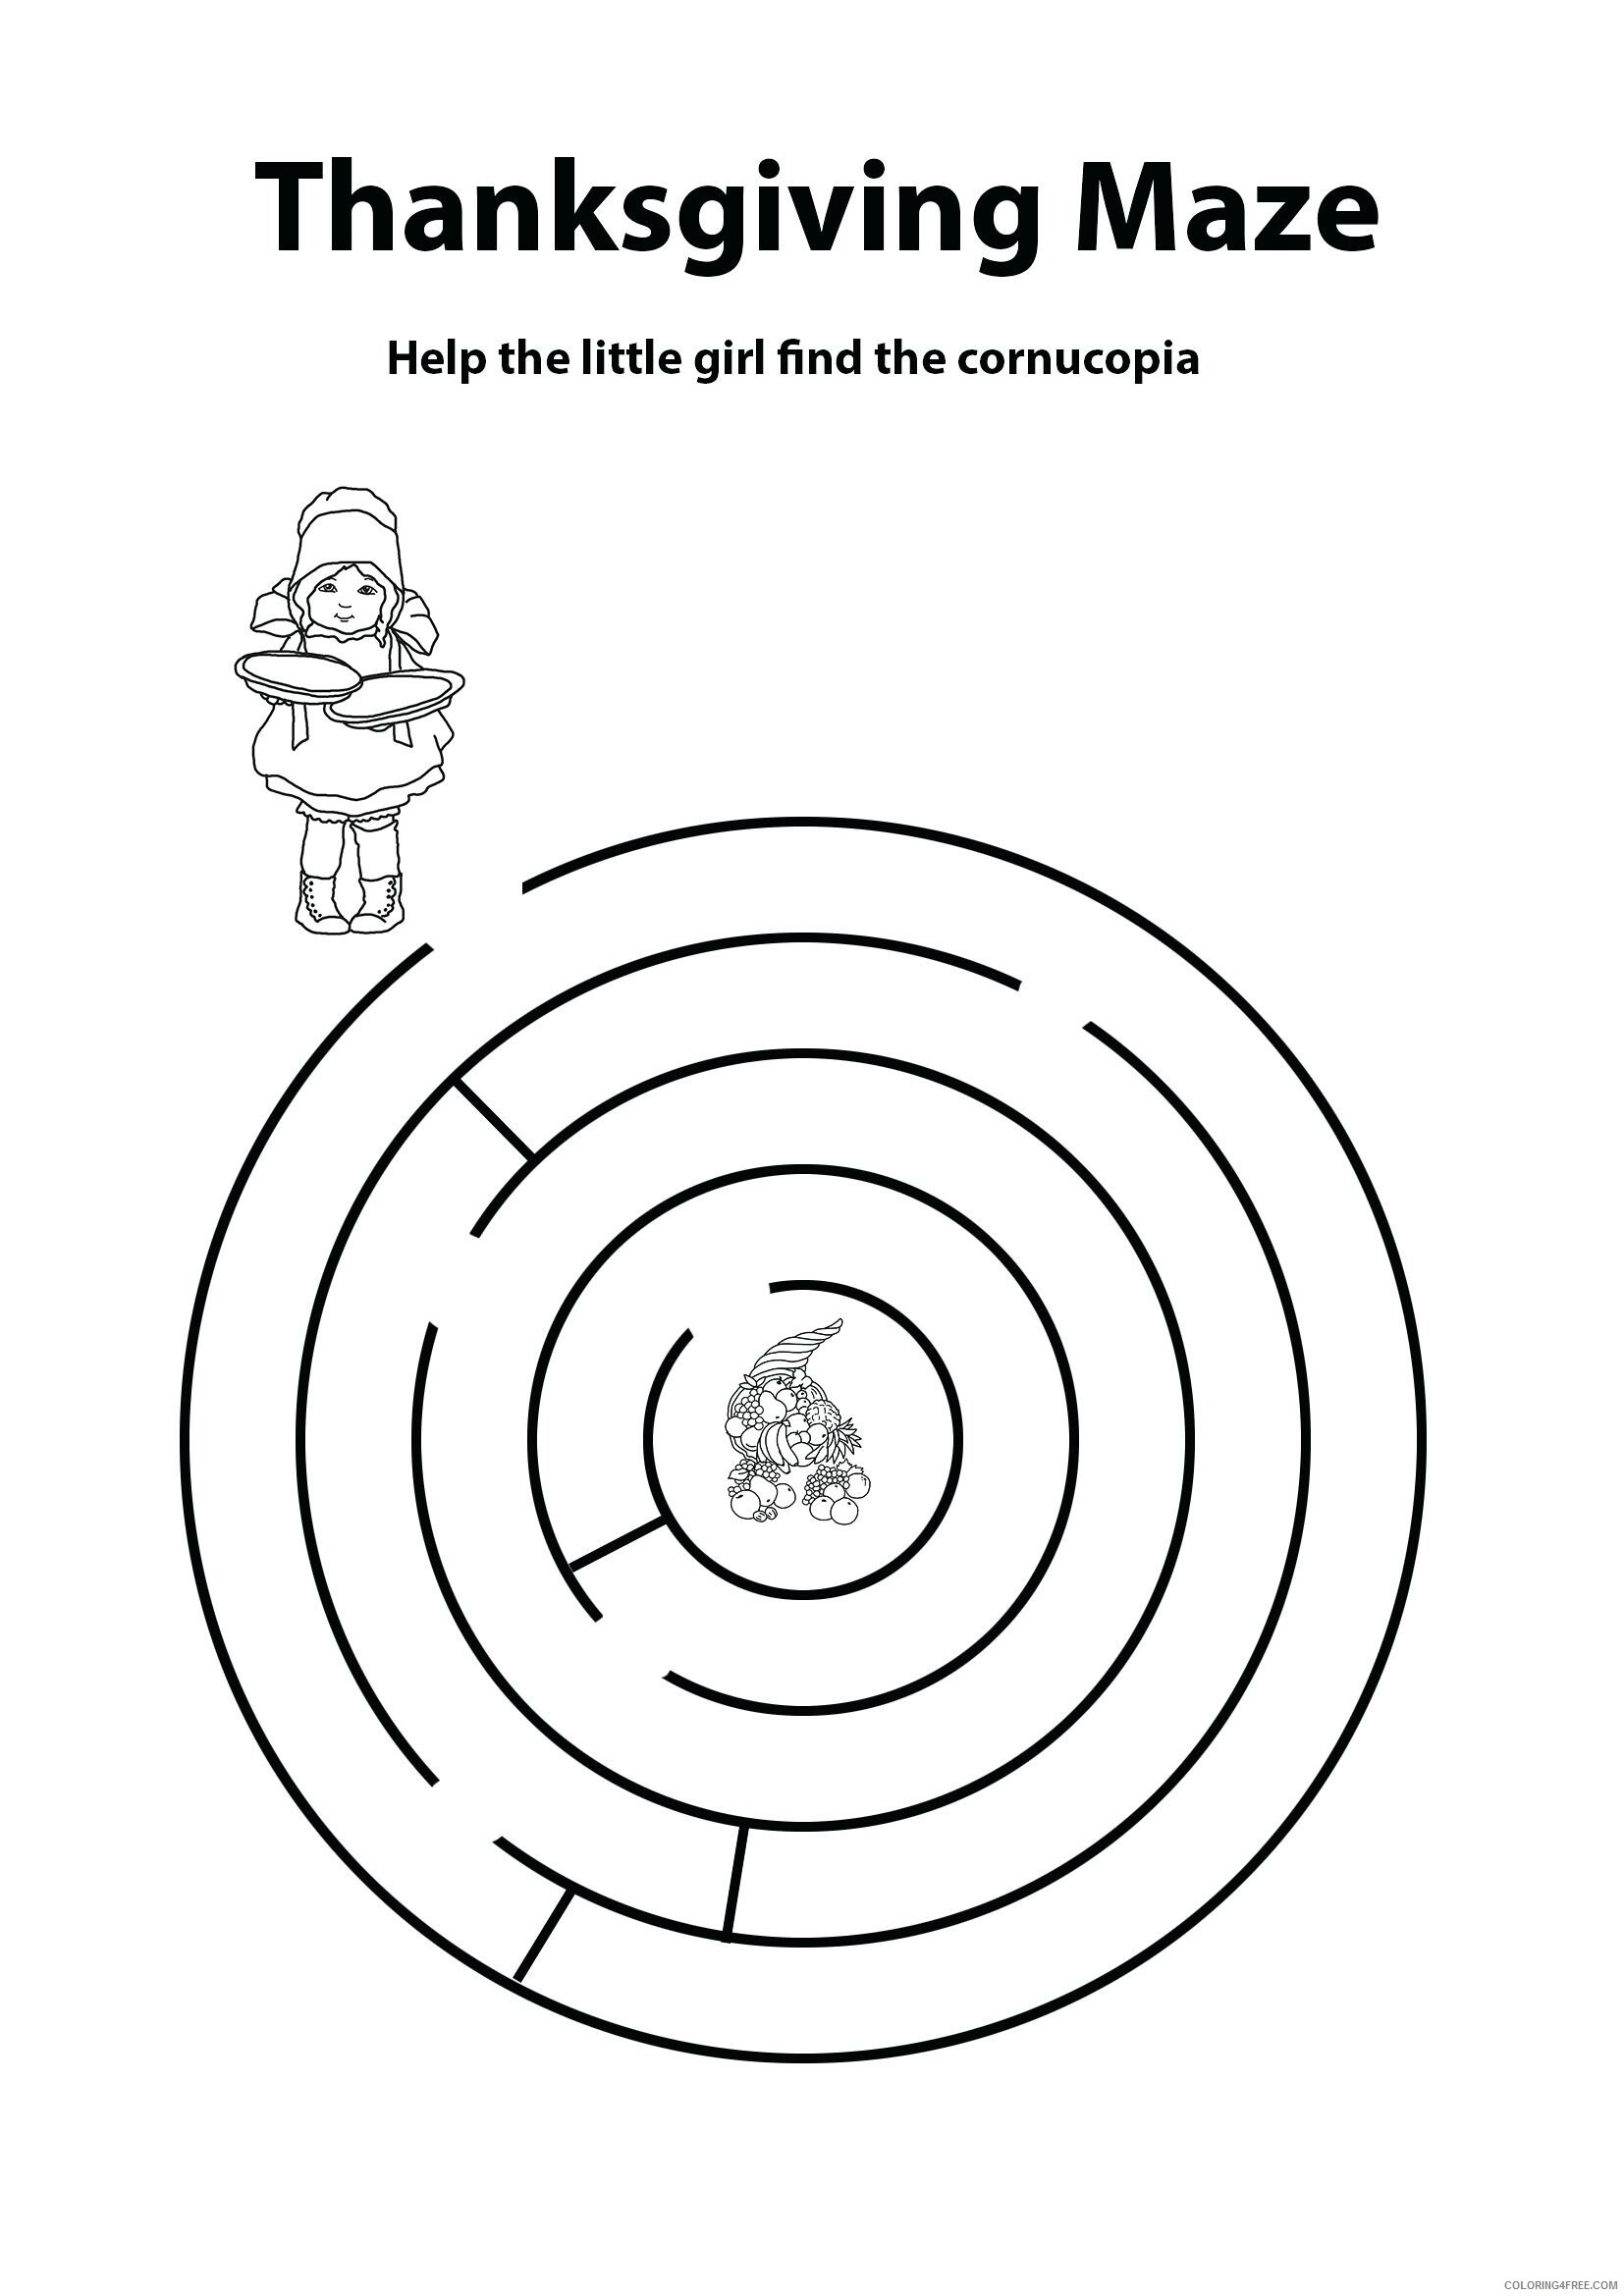 Preschool Coloring Pages Thanksgiving Maze for Preschoolers Printable 2021 4825 Coloring4free